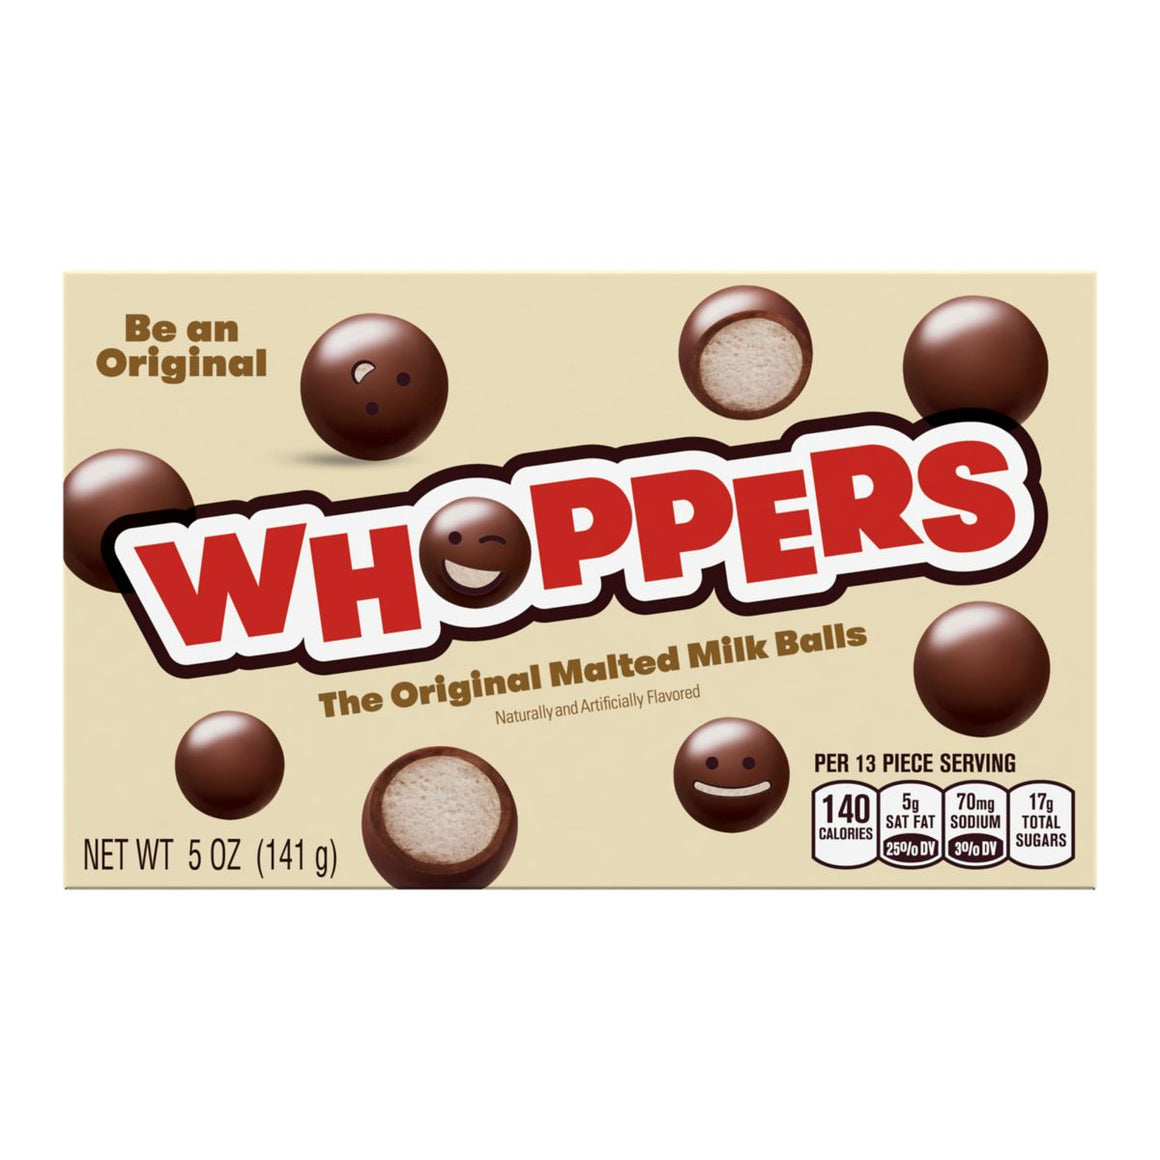 All City Candy Whoppers Malted Milk Balls - 5-oz. Theater Box Theater Boxes Hershey's 1 Box For fresh candy and great service, visit www.allcitycandy.com